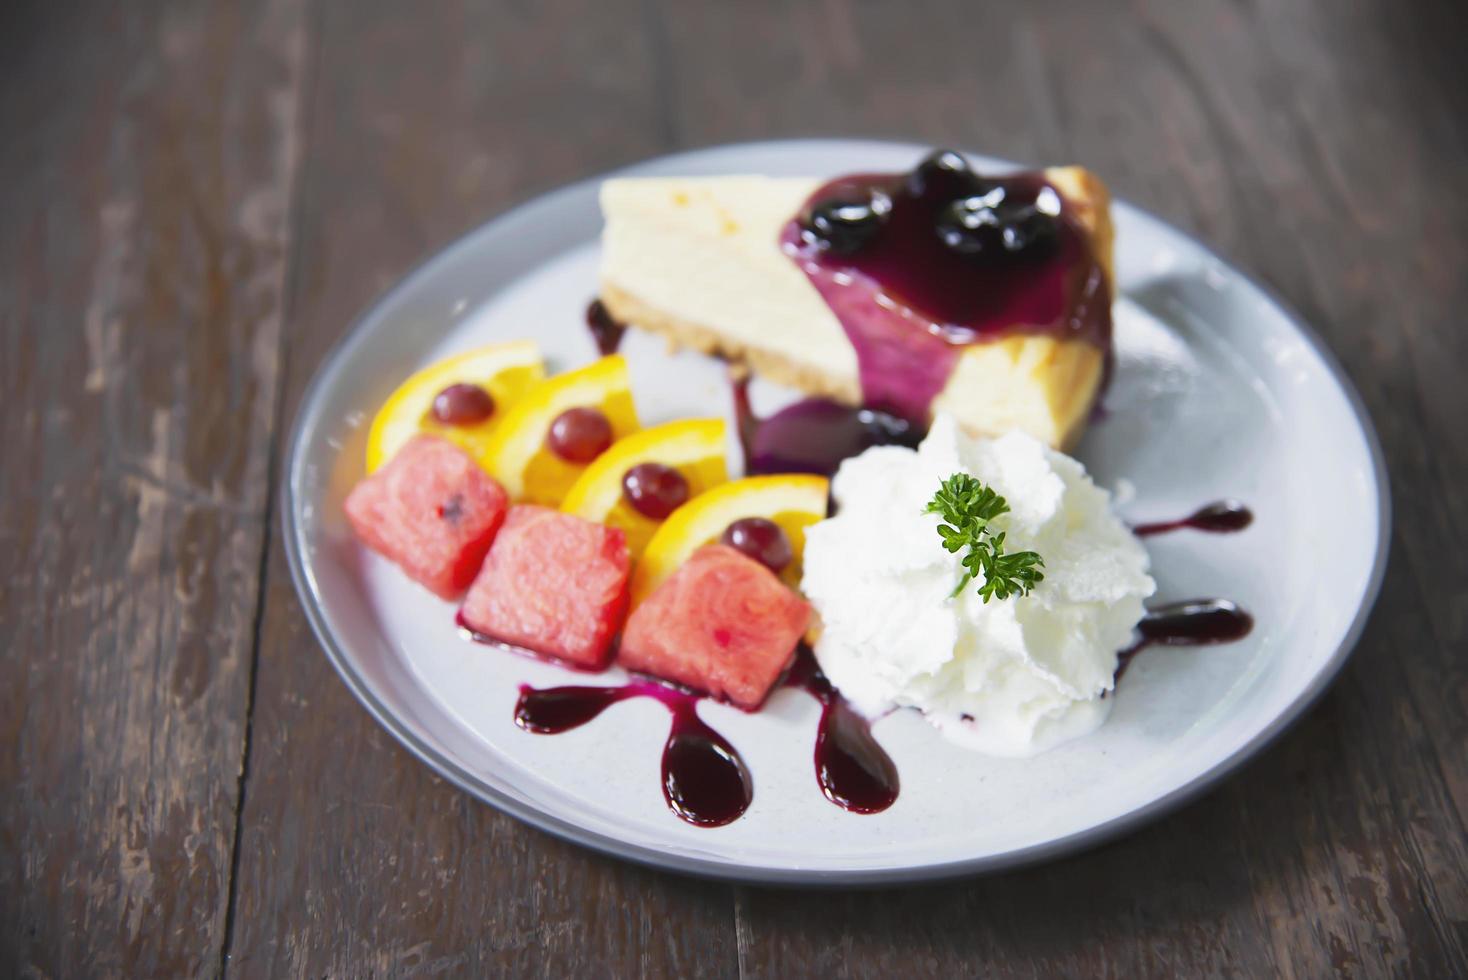 Colorful New York cheese cake with well decorated fruit pieces and whipped cream in white plate - cake recipe menu concept photo